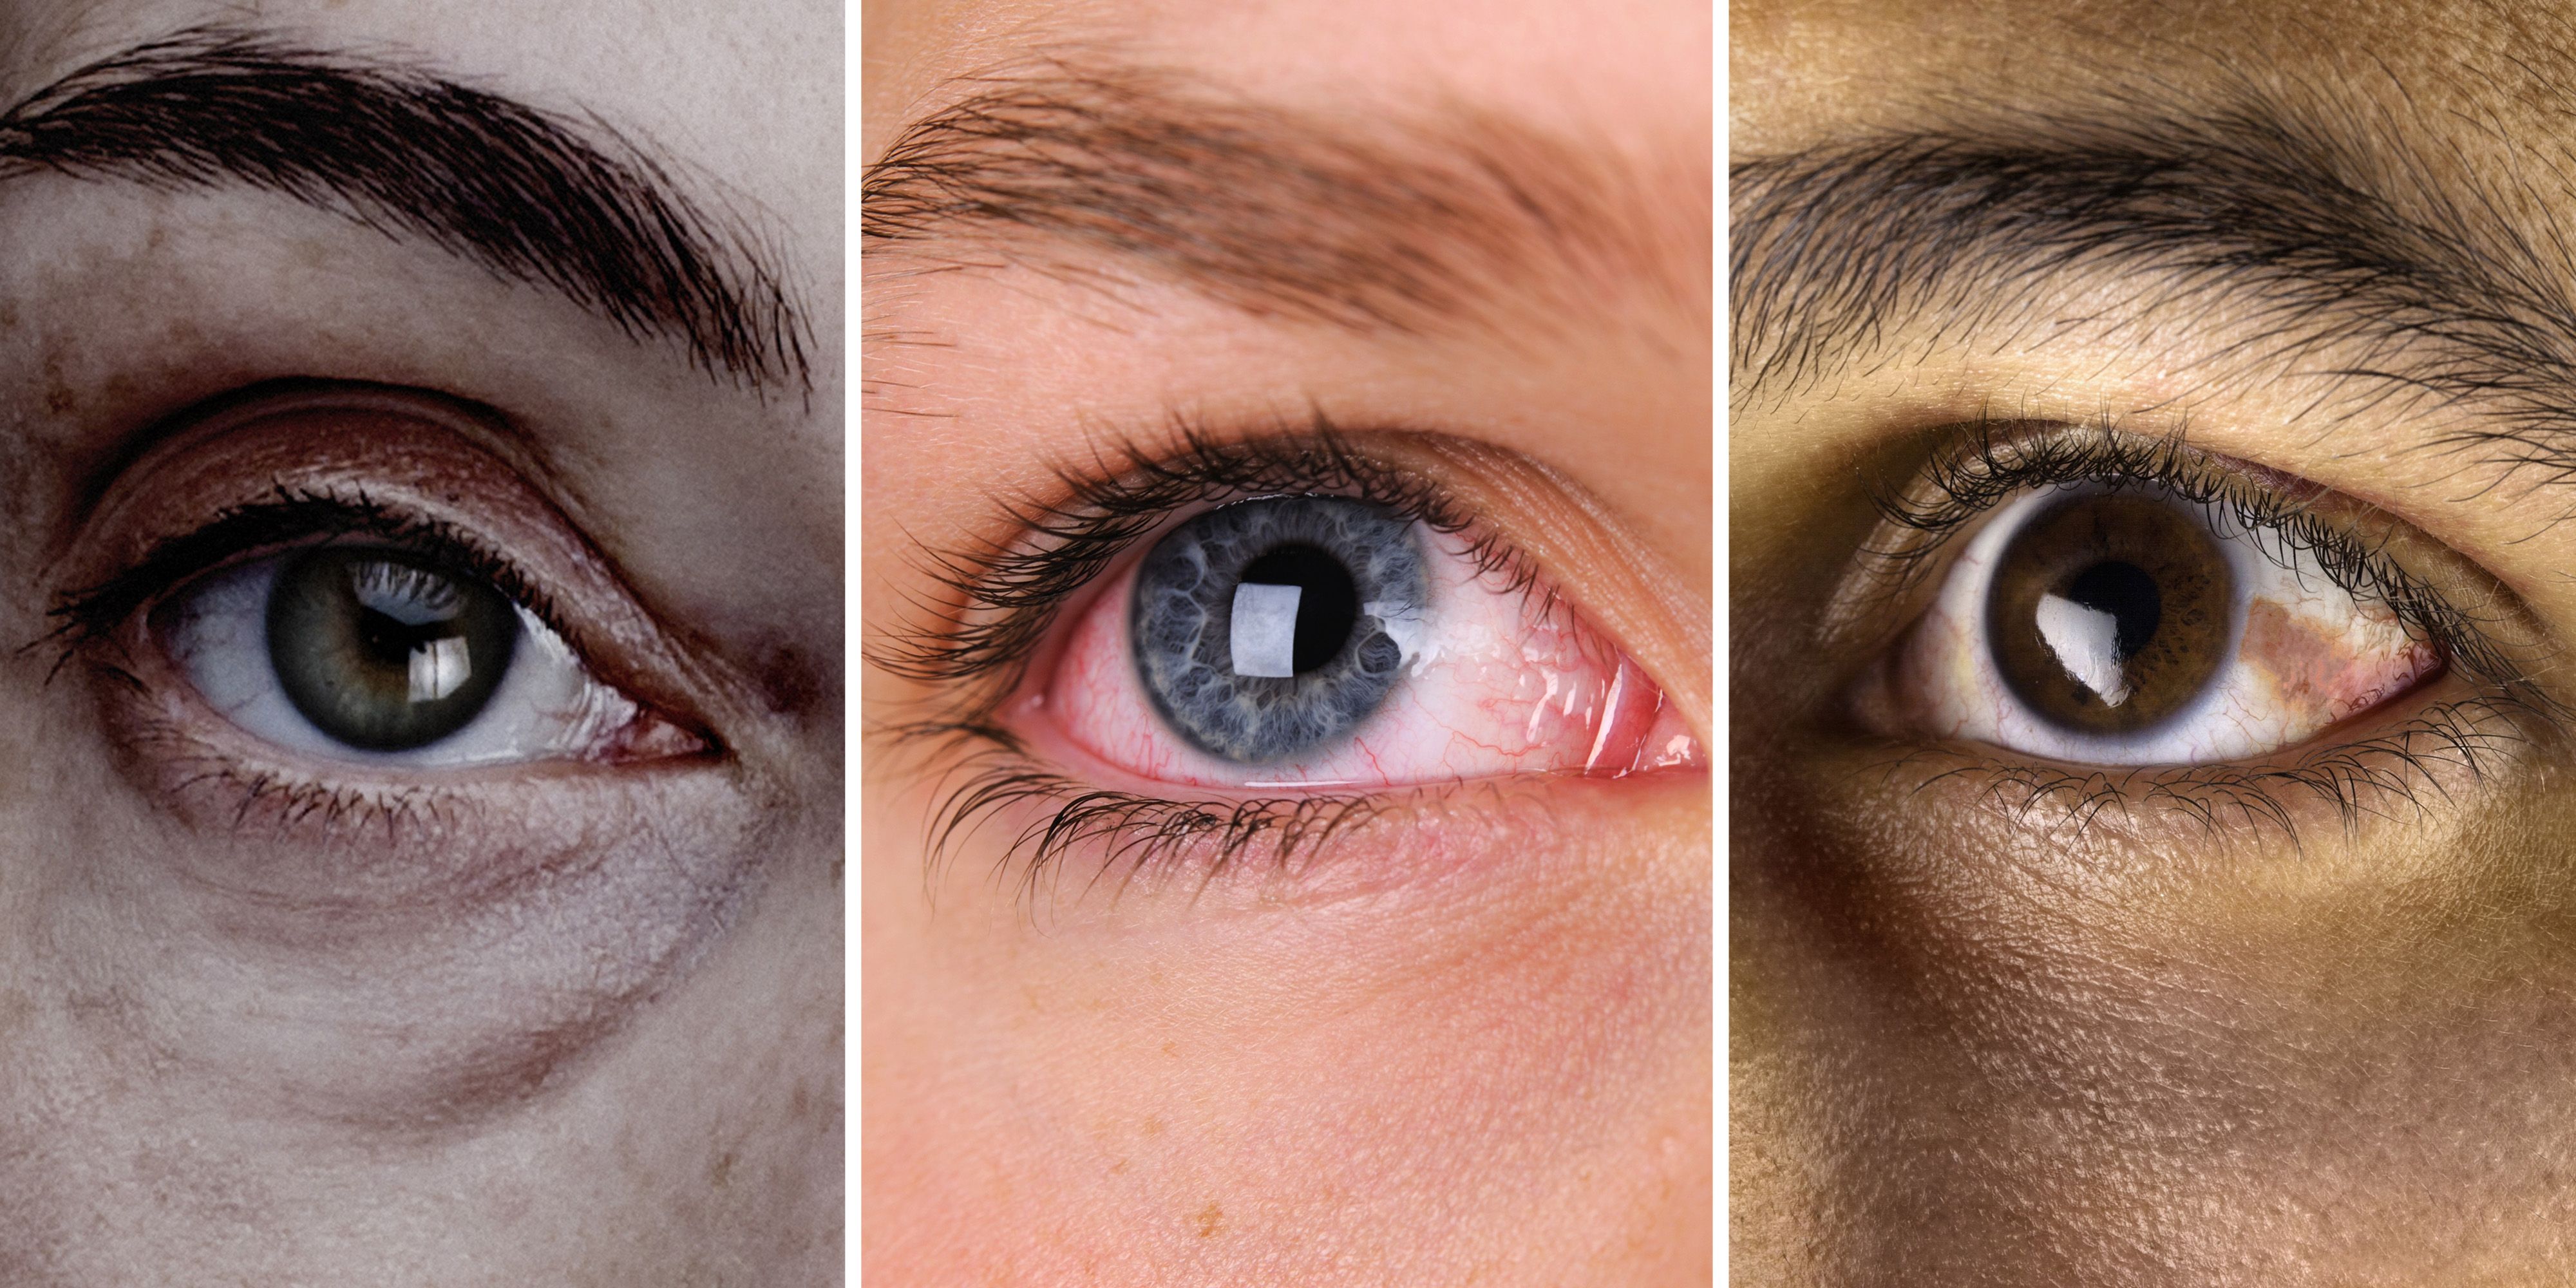 What Your Eyes Can Tell You About Your Health - Eye Problems